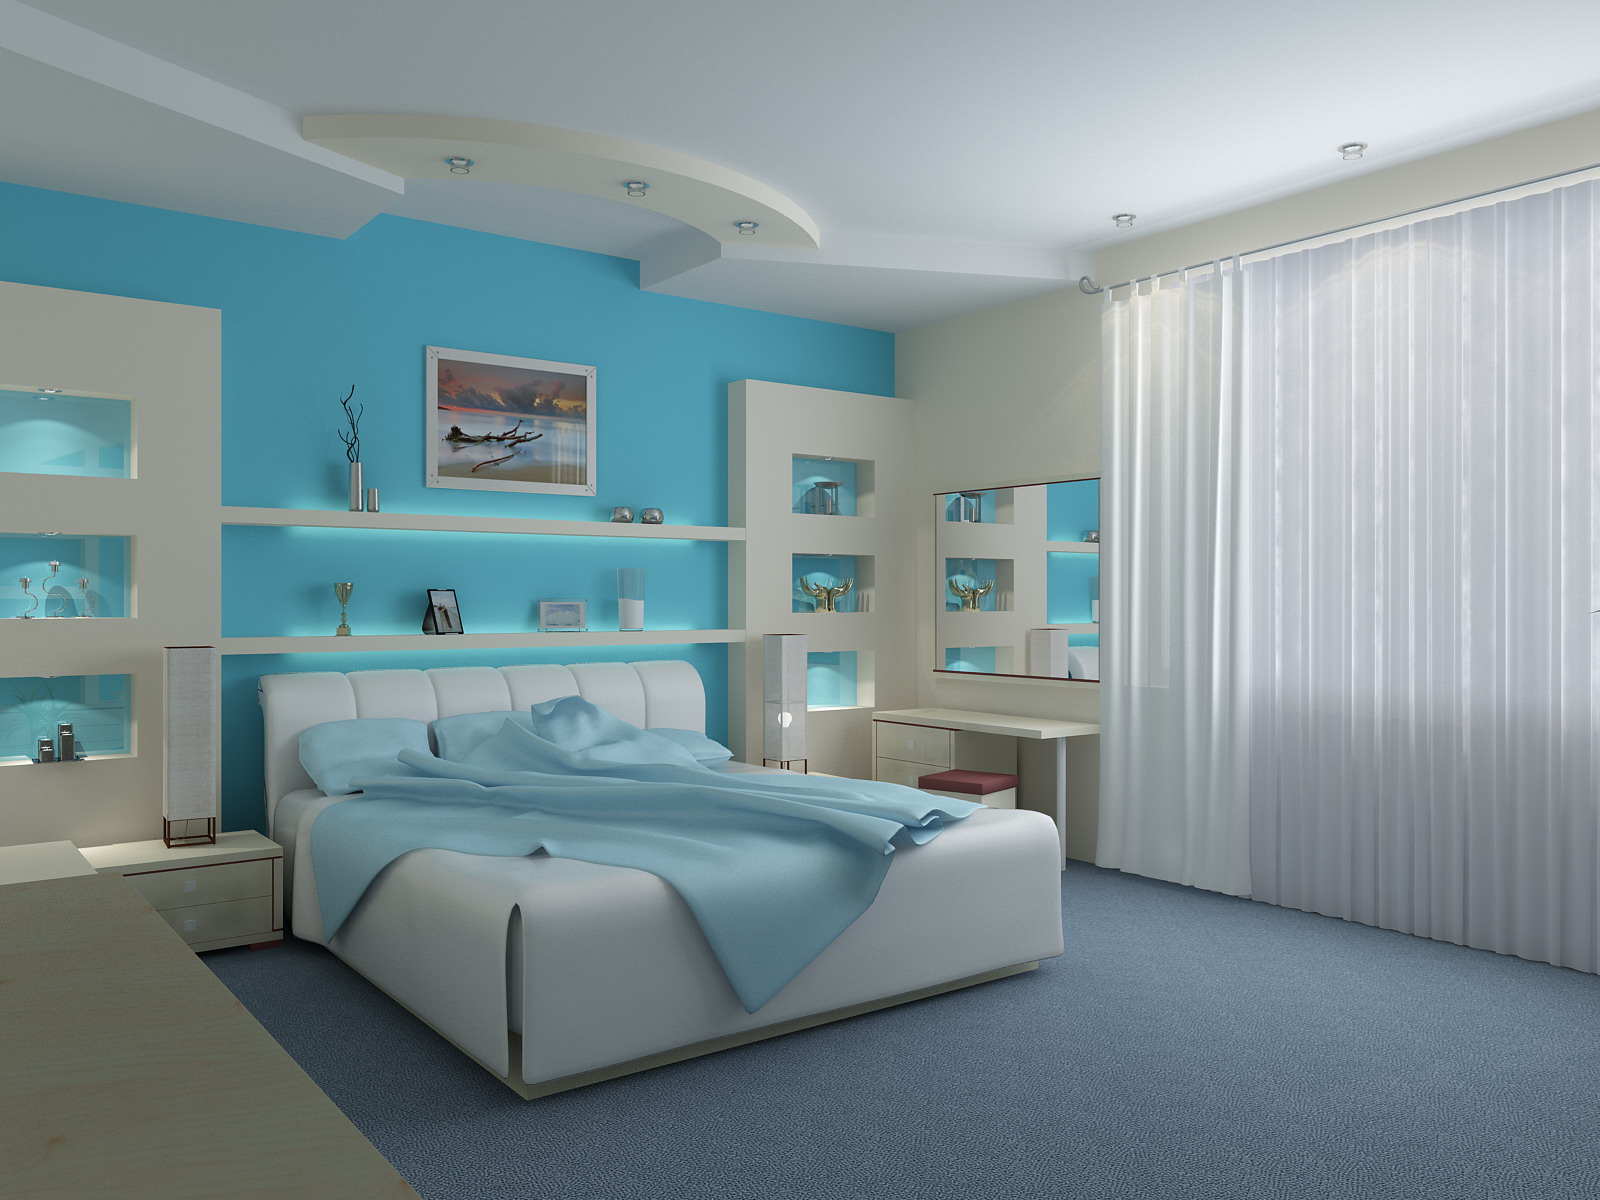 blue and white contemporary bedroom ideas photo - 5